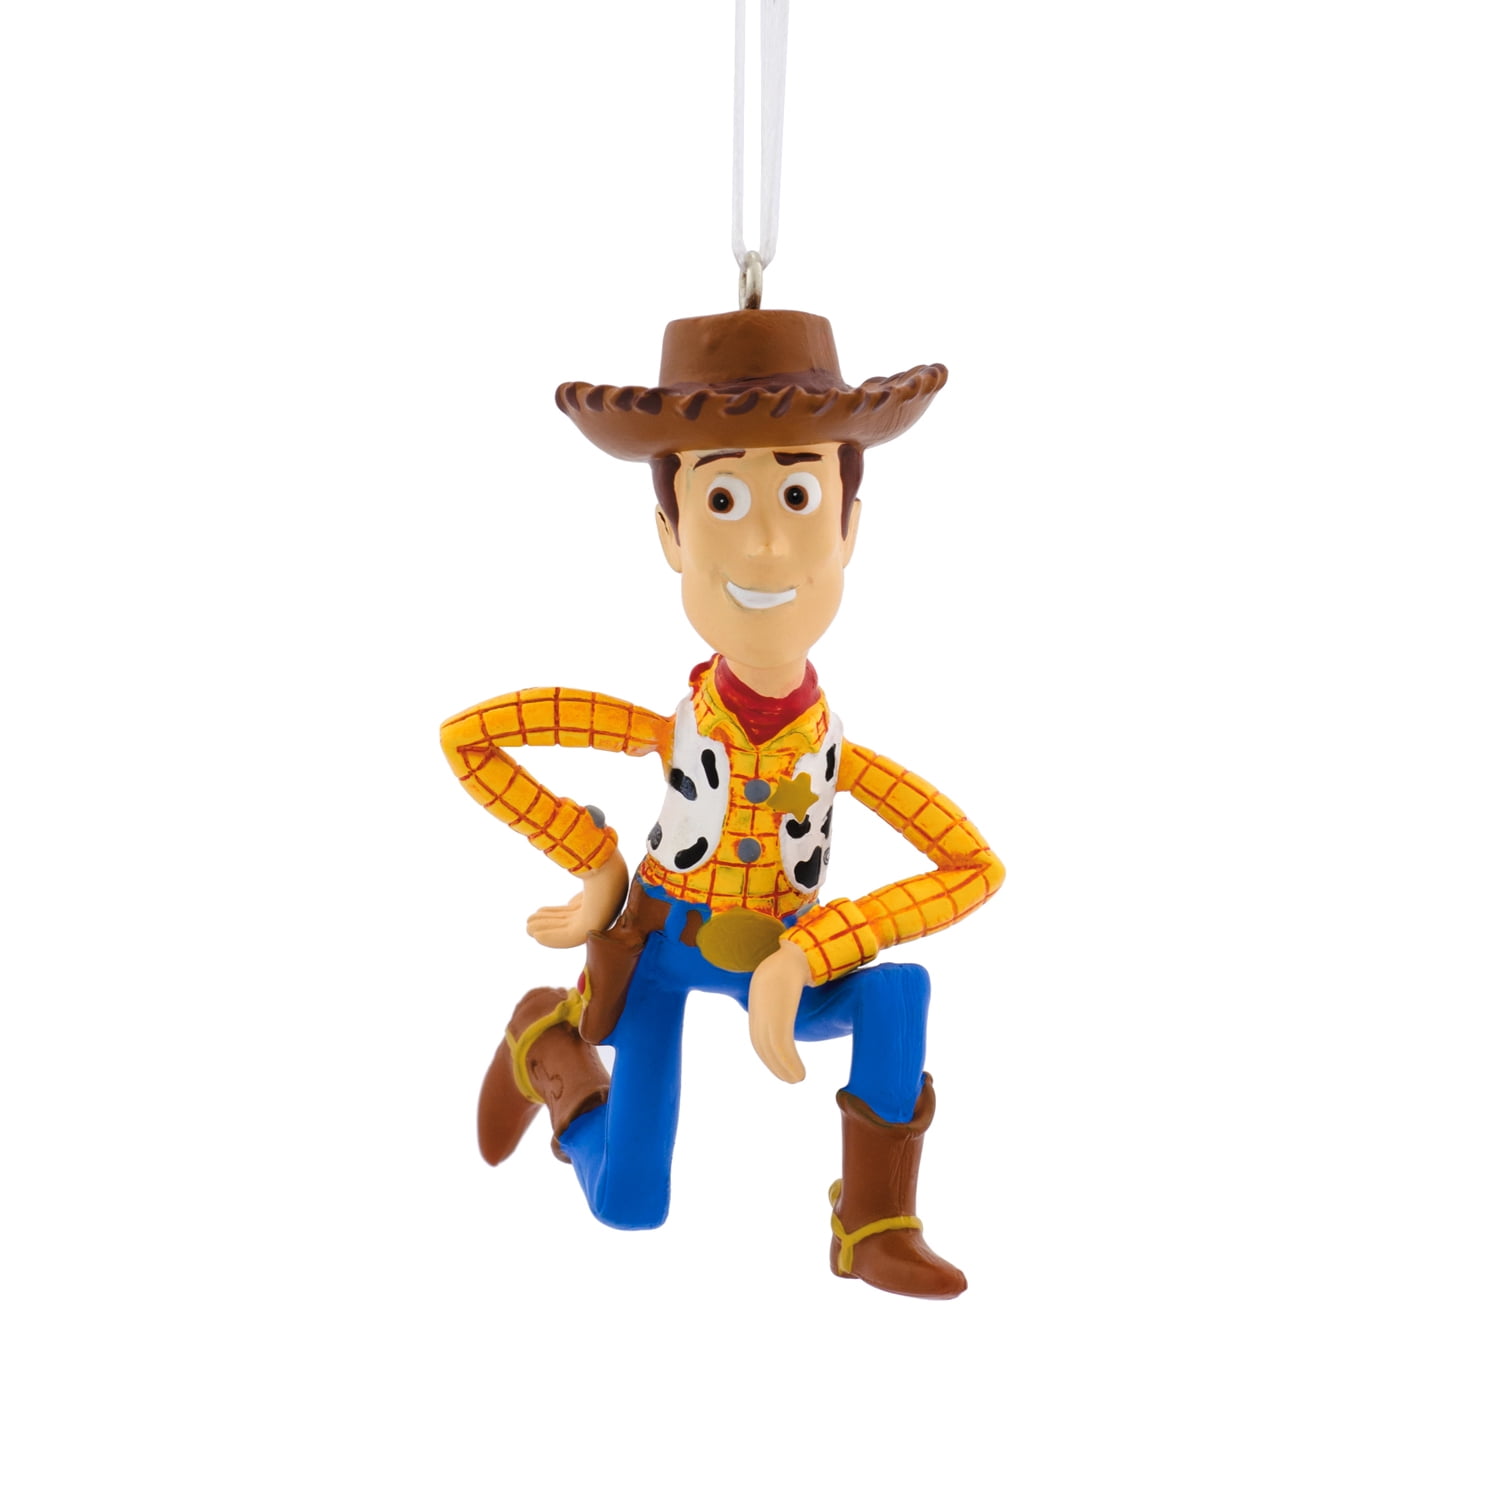 Disney Toy Story Christmas Ornament 4 Piece Set Featuring Woody  ~BRAND NEW~